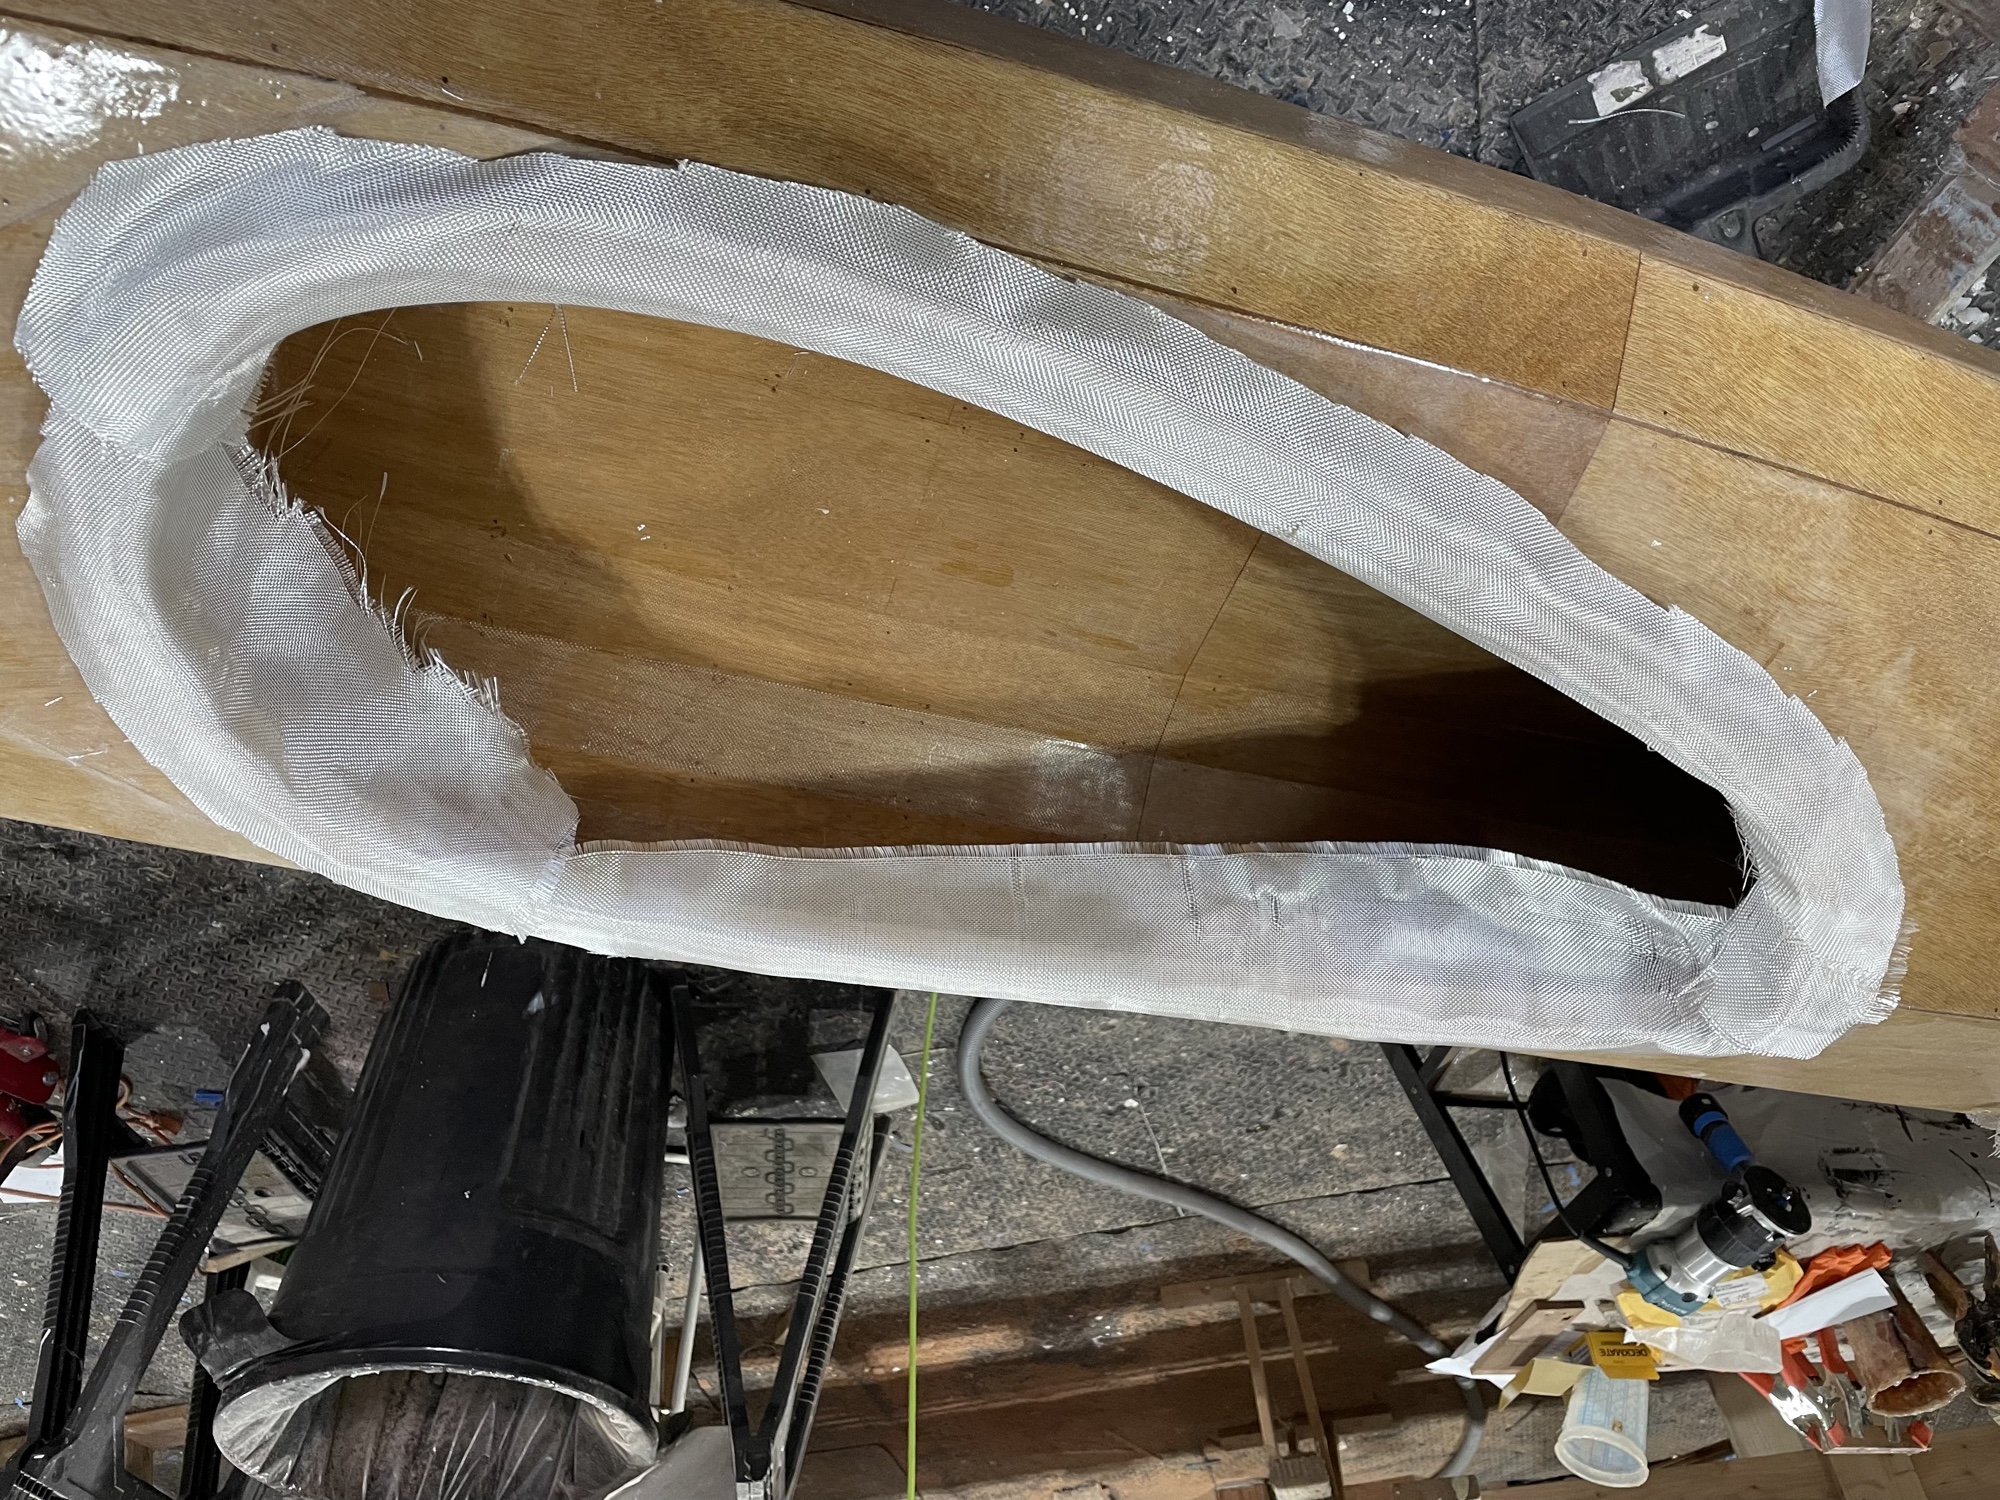  10/11/23 - The coaming is ready for fiberglass. 